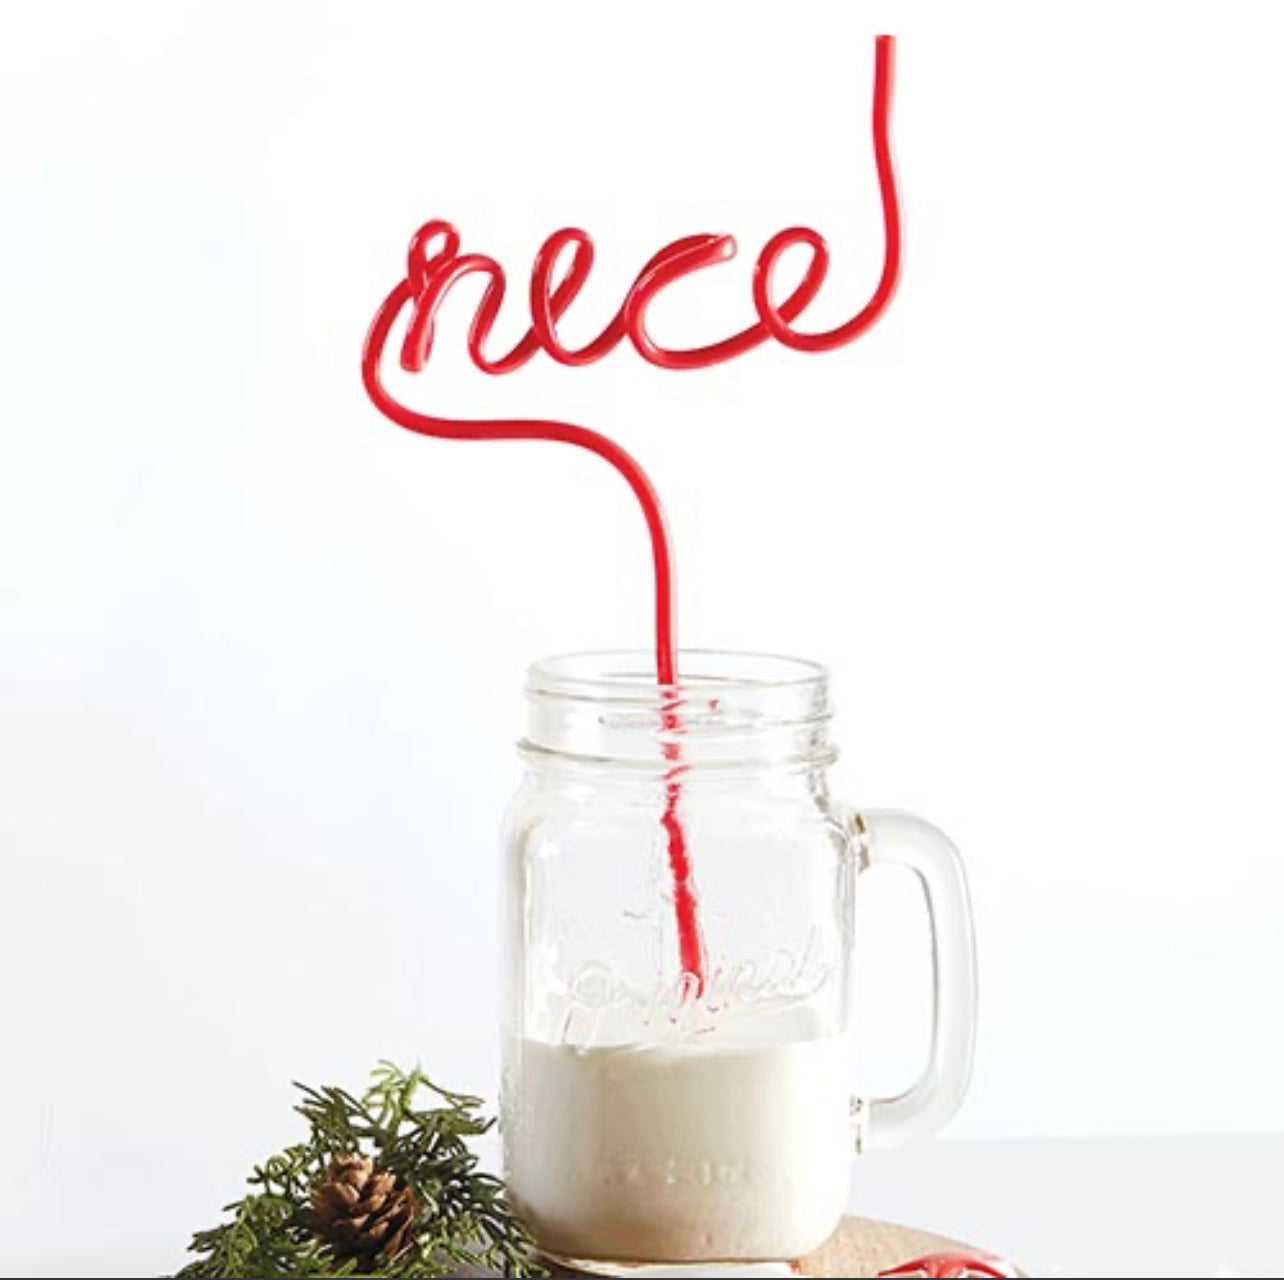 example of the "nice" christmas straw being used in a glass of milk